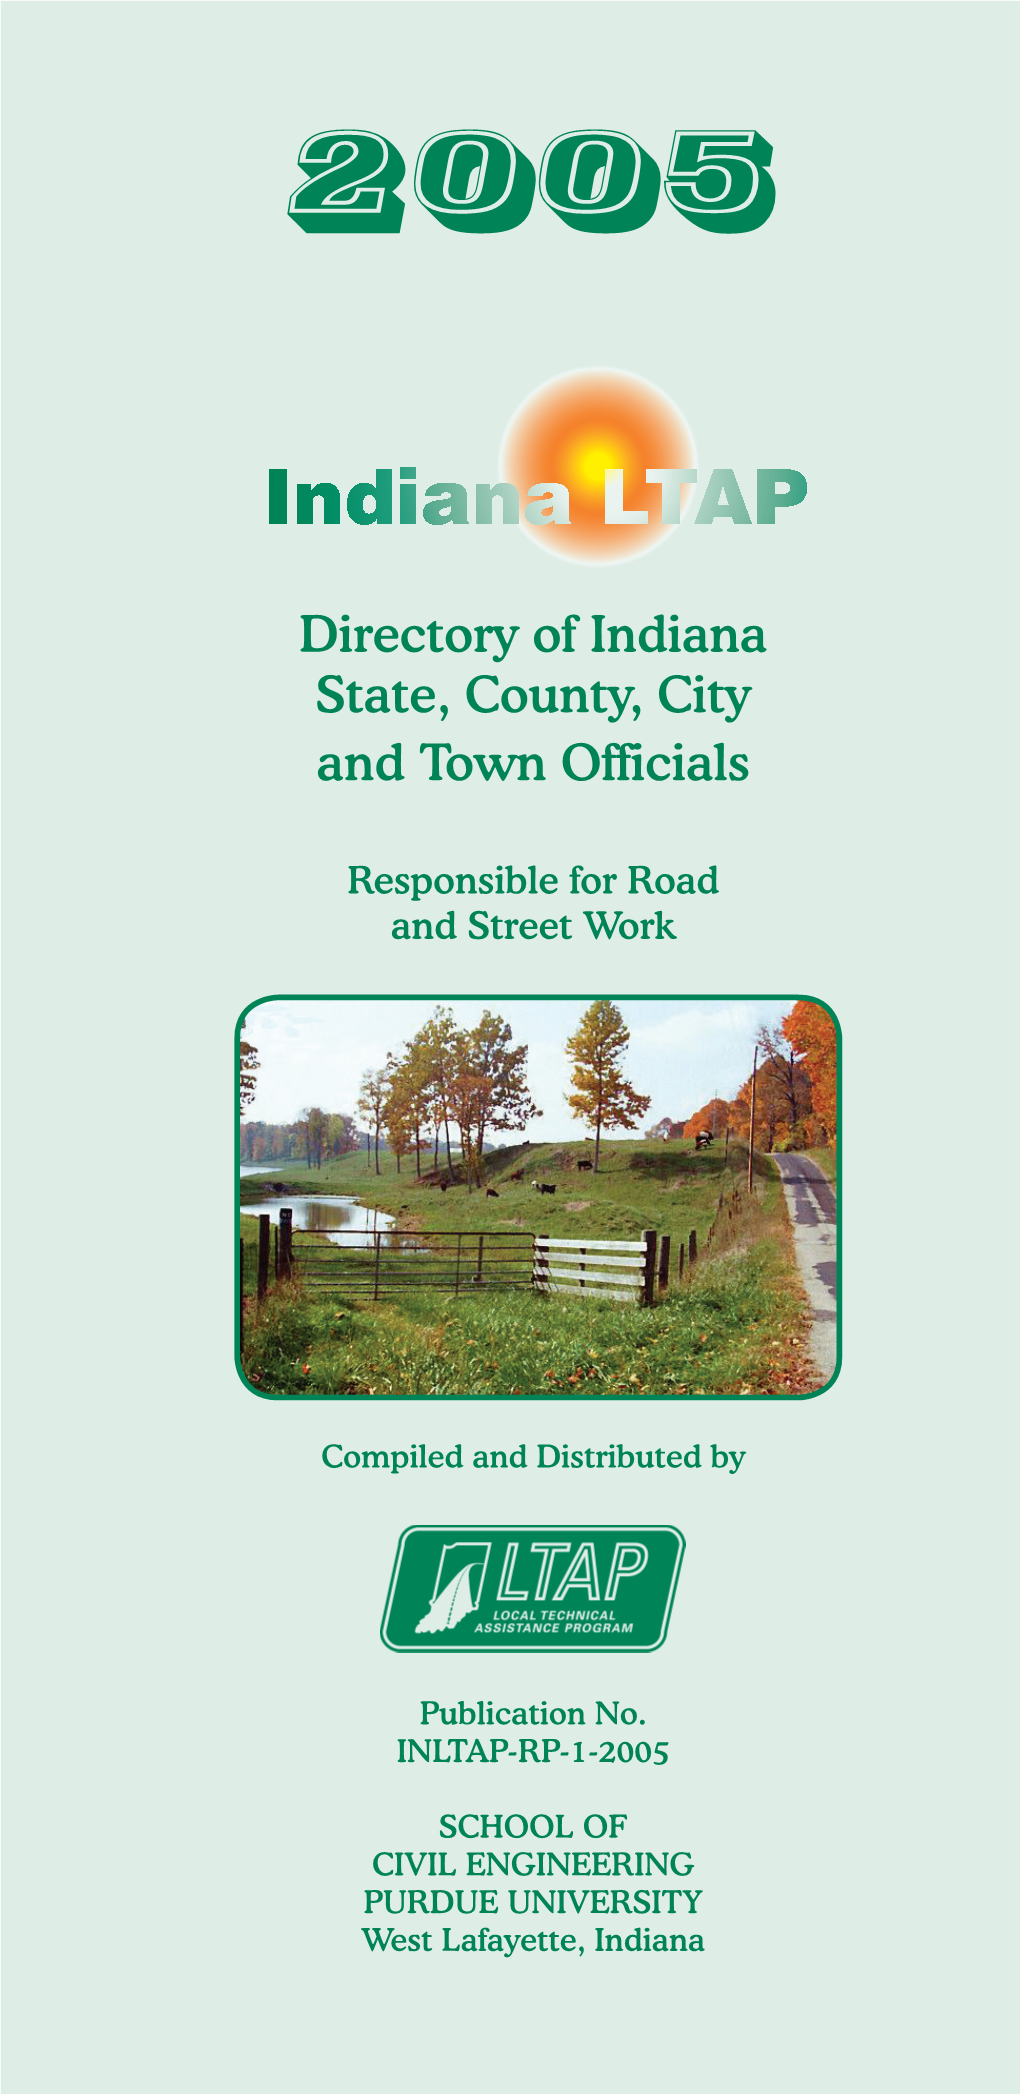 Directory of Indiana State, County, City and Town of Fi Cials